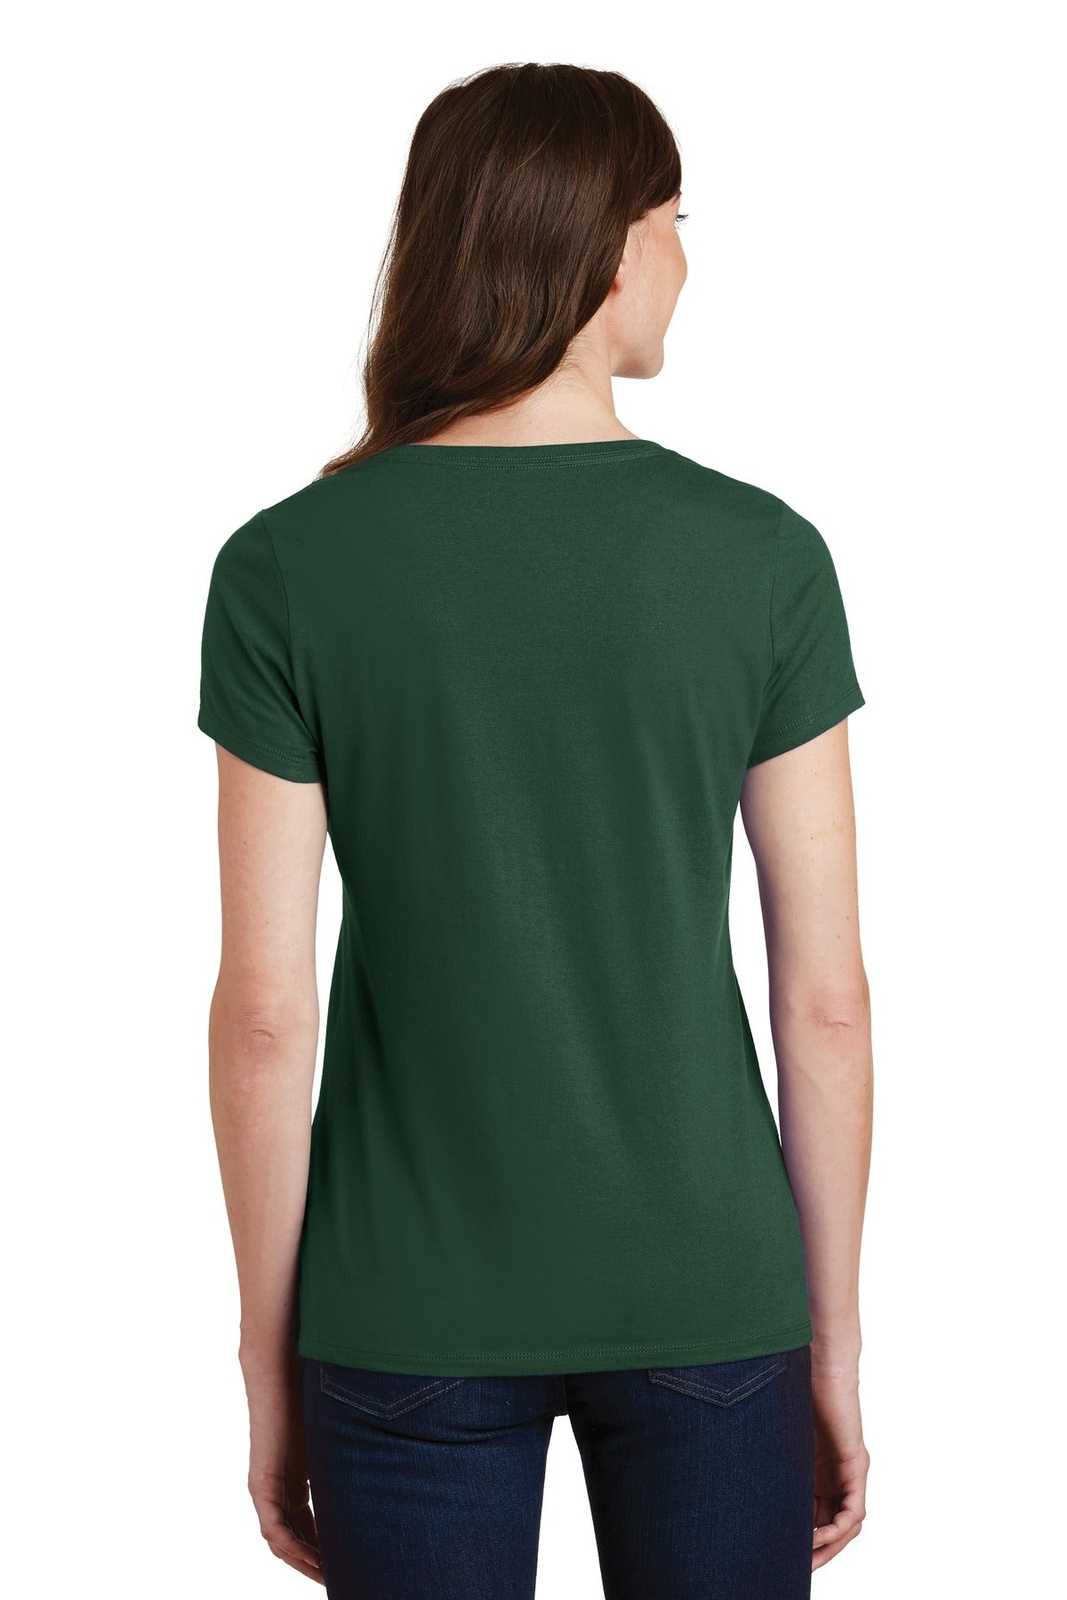 Port & Company LPC450V Ladies Fan Favorite V-Neck Tee - Forest Green - HIT a Double - 1